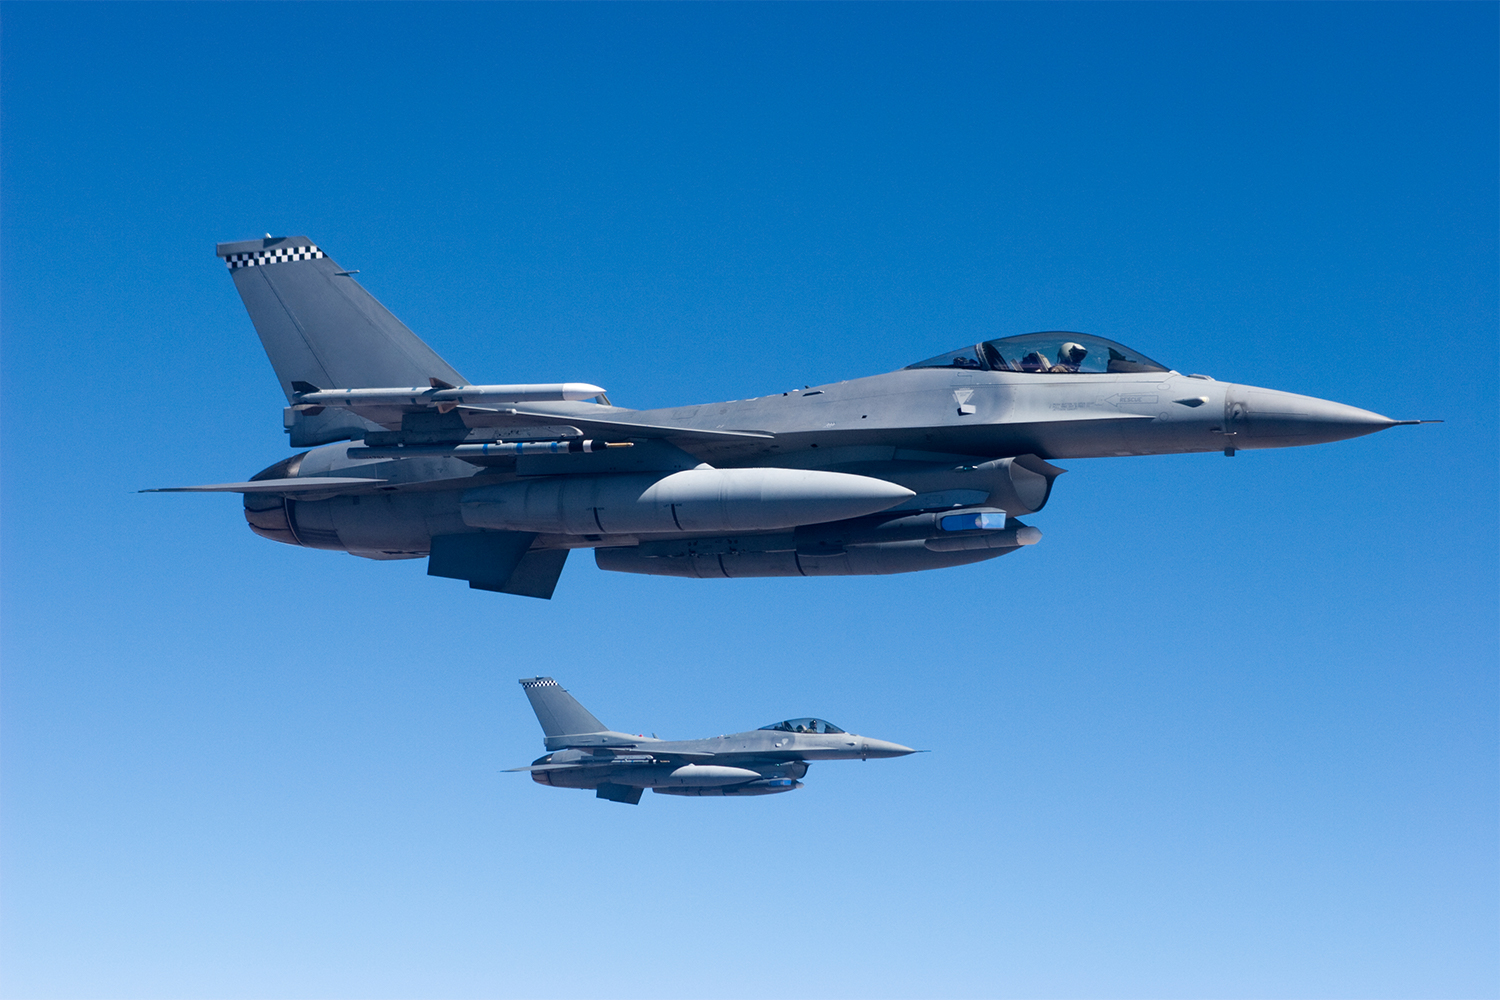 Two F-16 fighter aircraft flying in formation.